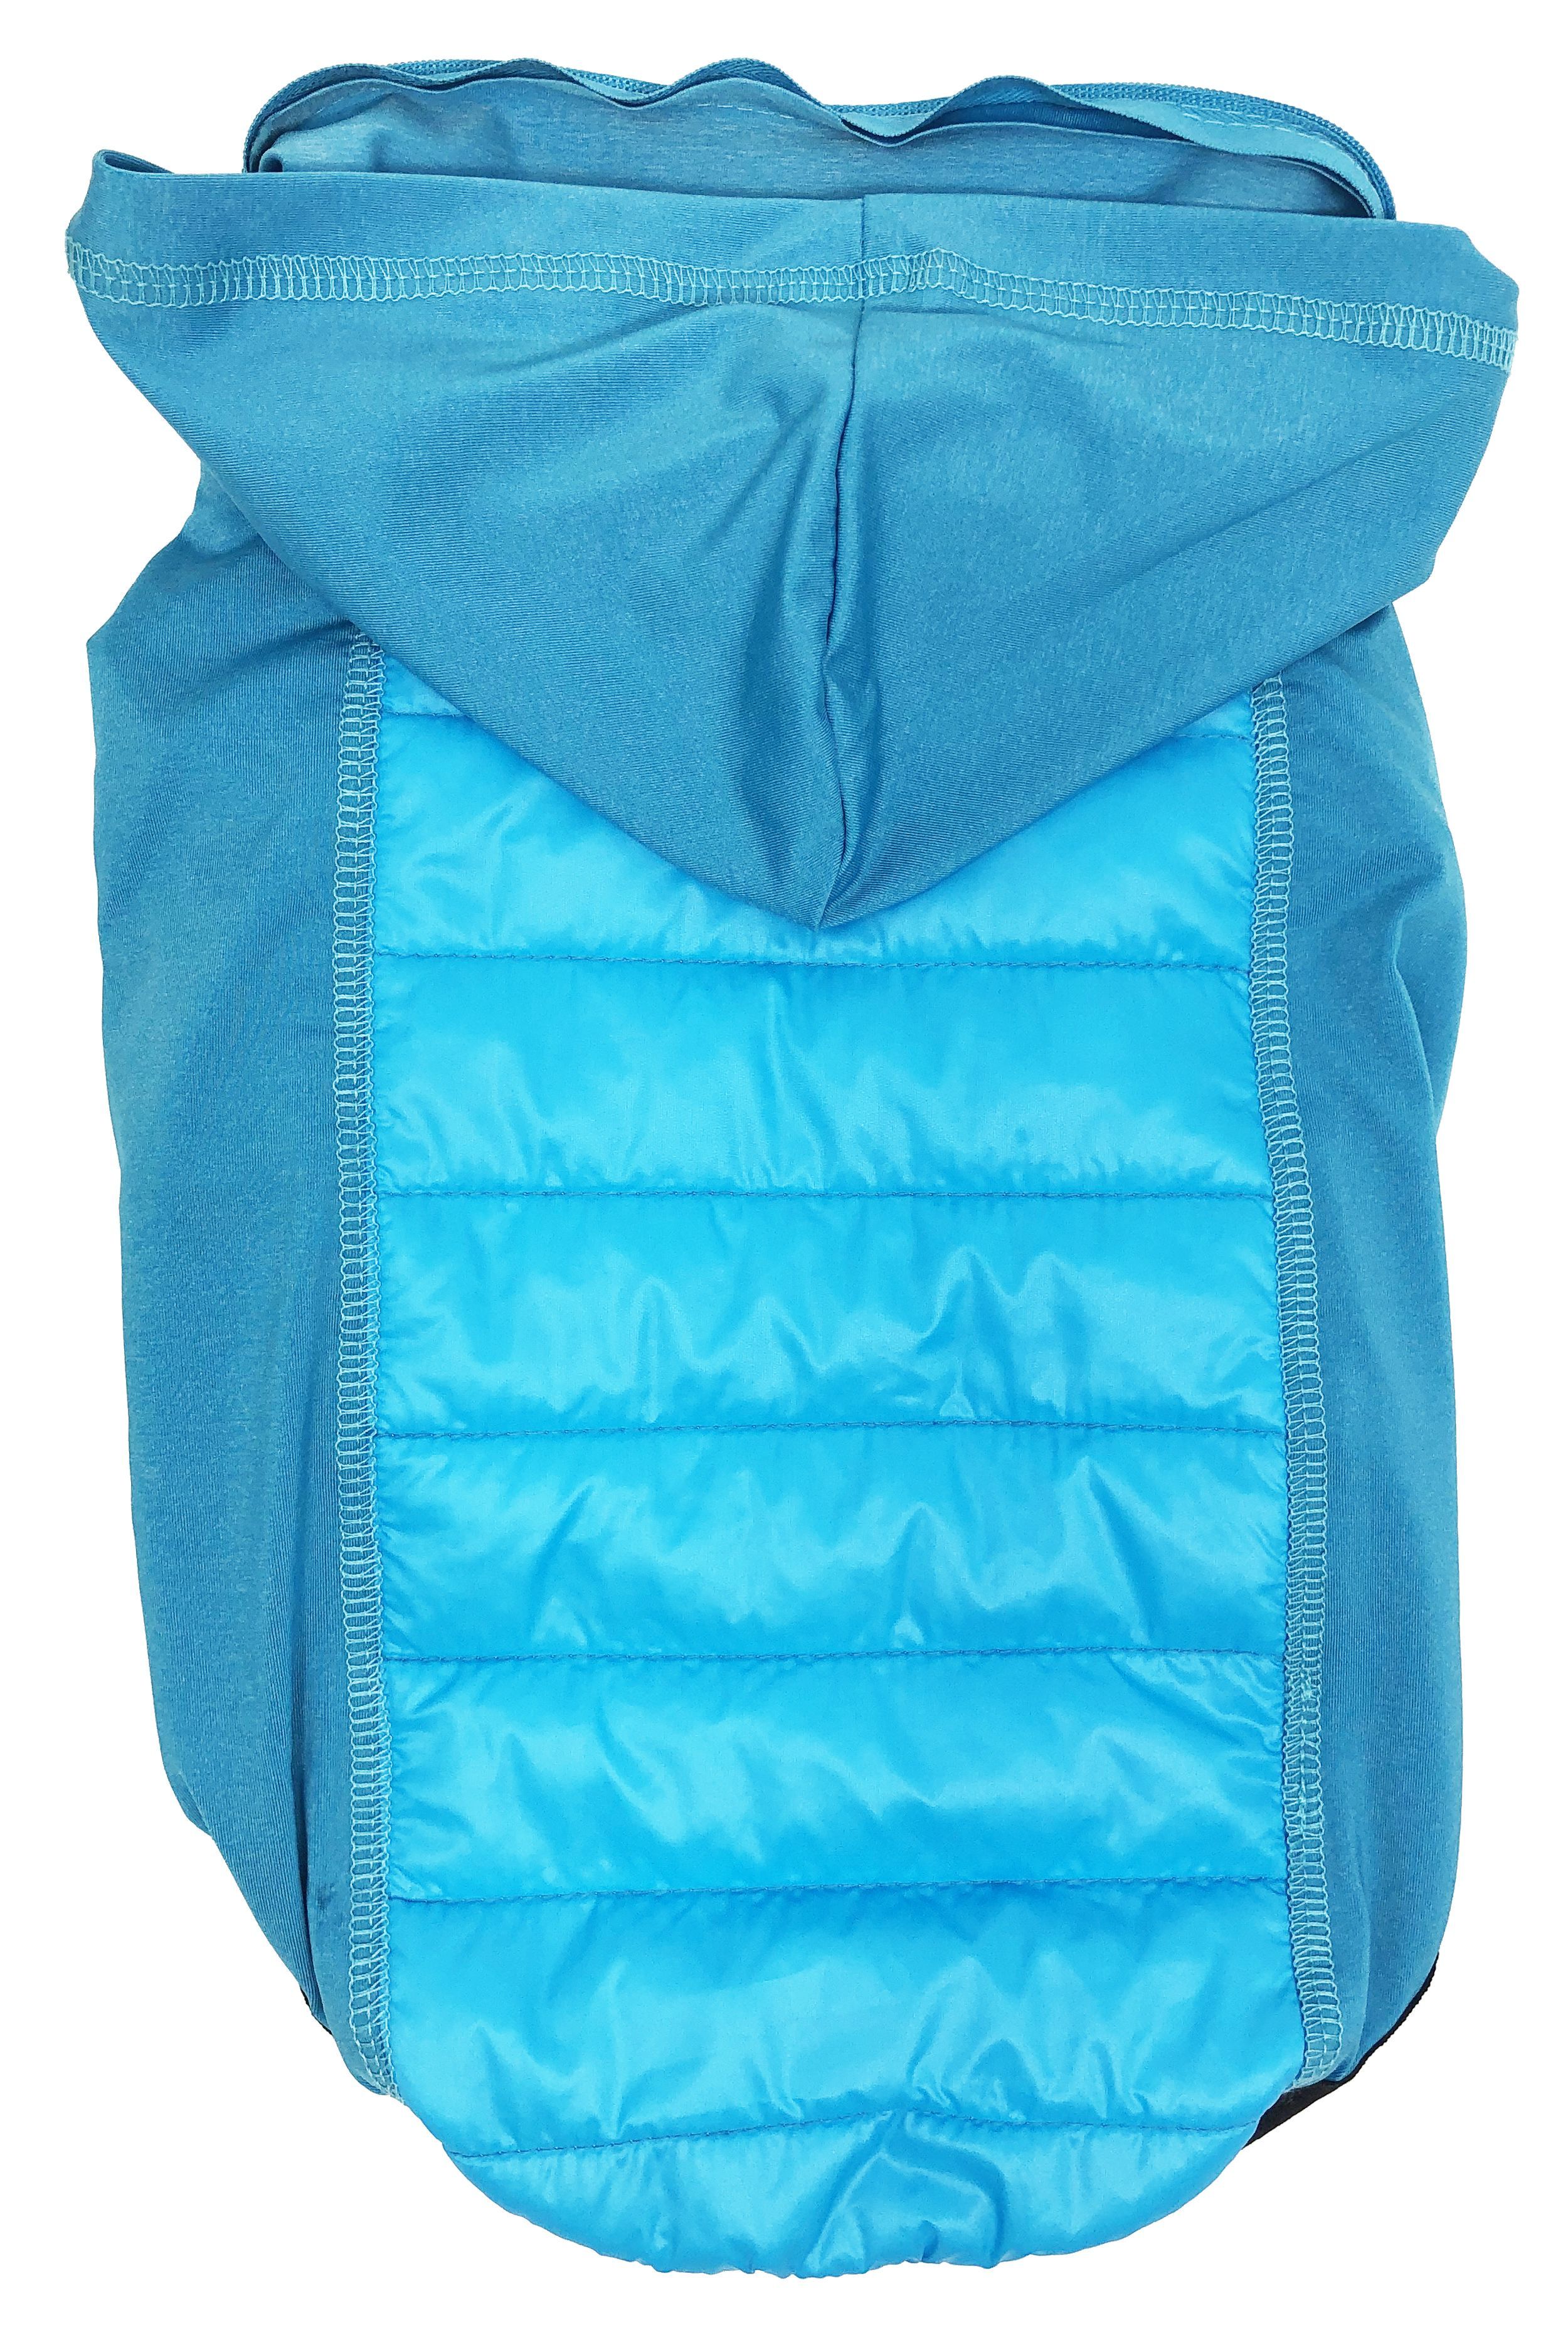 Pet Life ® 'Apex' Lightweight Hybrid 4-Season Stretch and Quick-Dry Dog Coat w/ Pop out Hood Blue X-Small